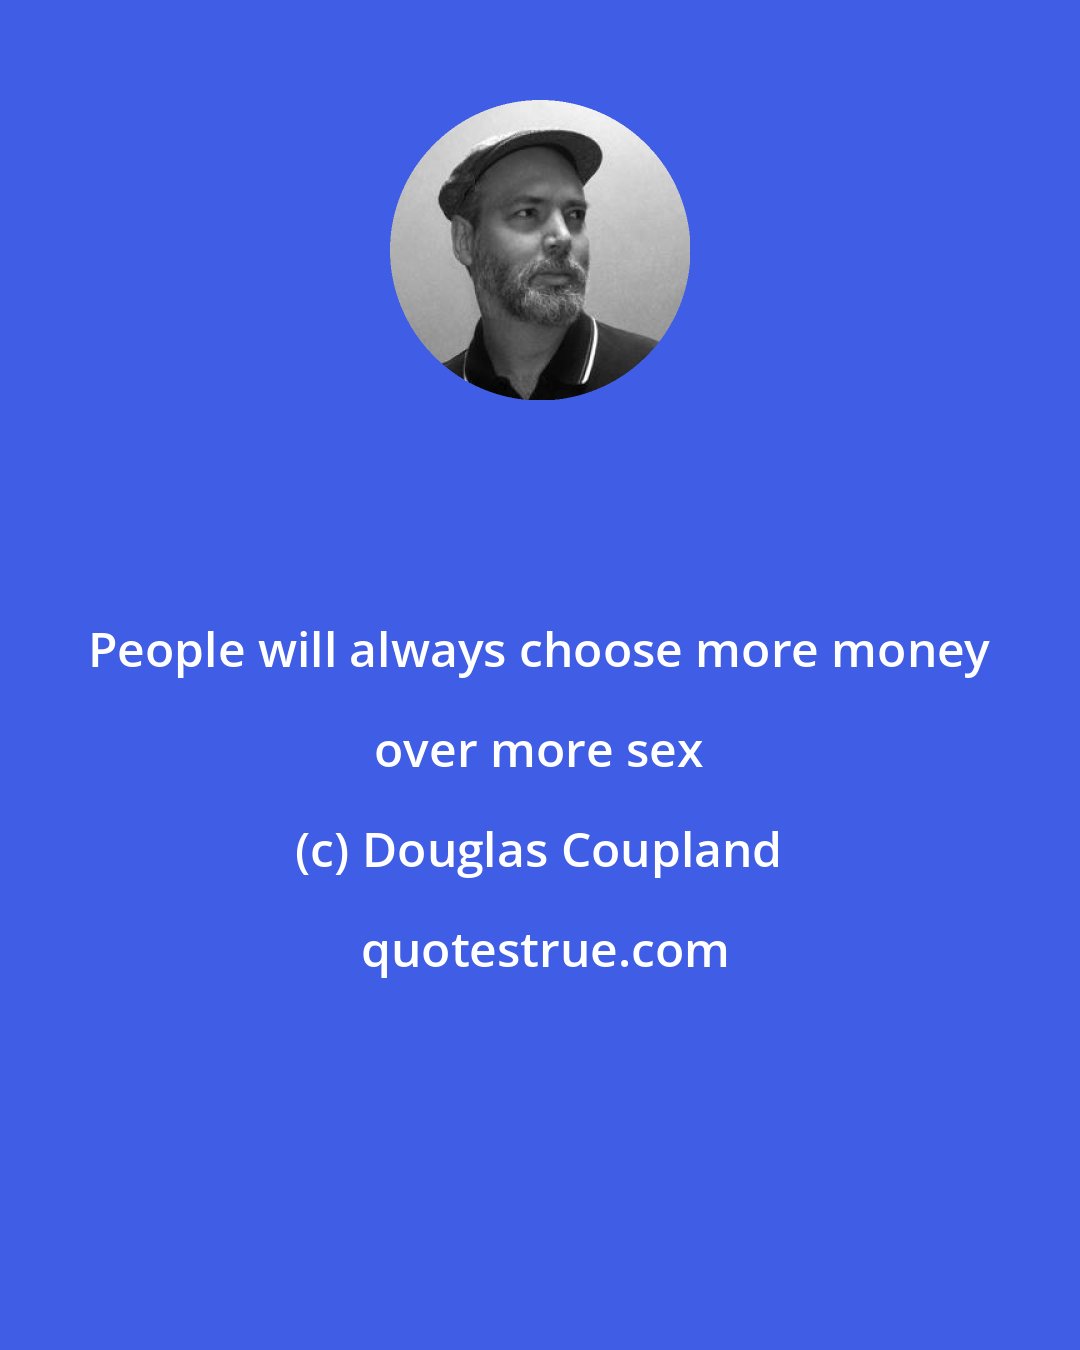 Douglas Coupland: People will always choose more money over more sex